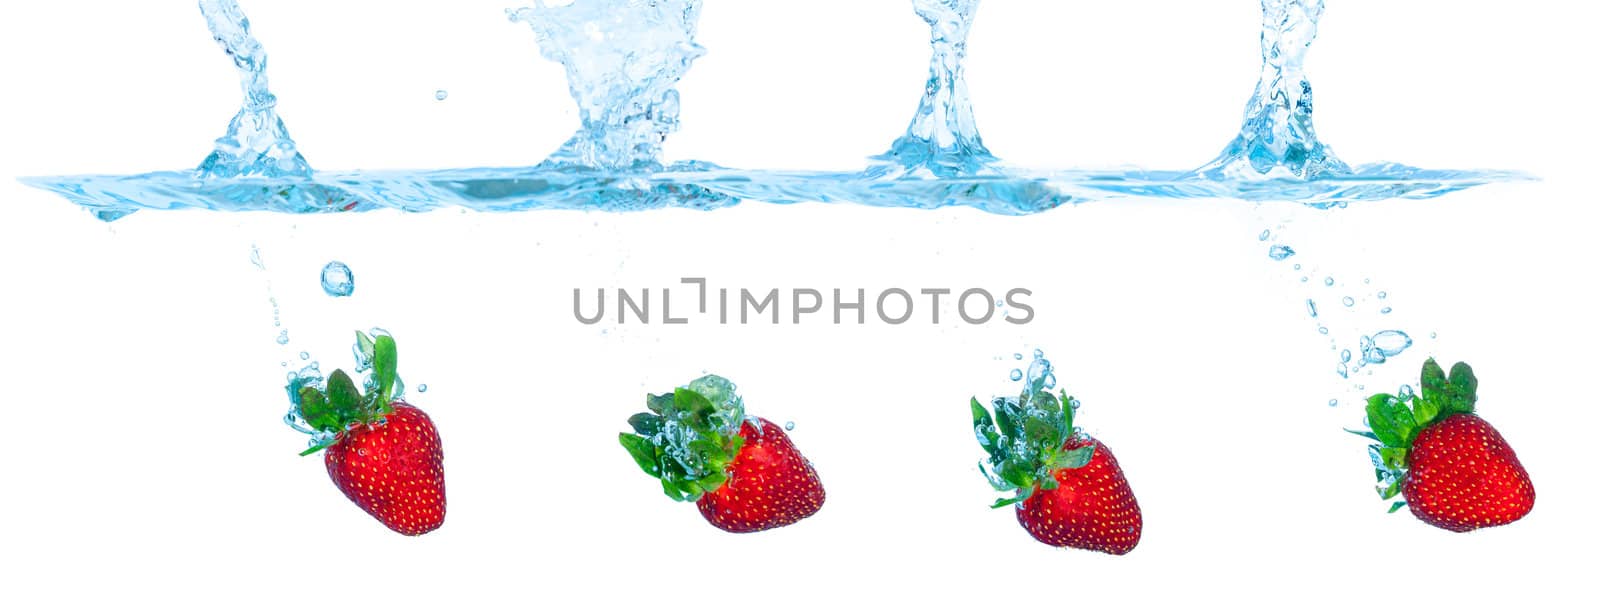 Collage Fresh Strawberry Dropped into Water with Splash by Discovod